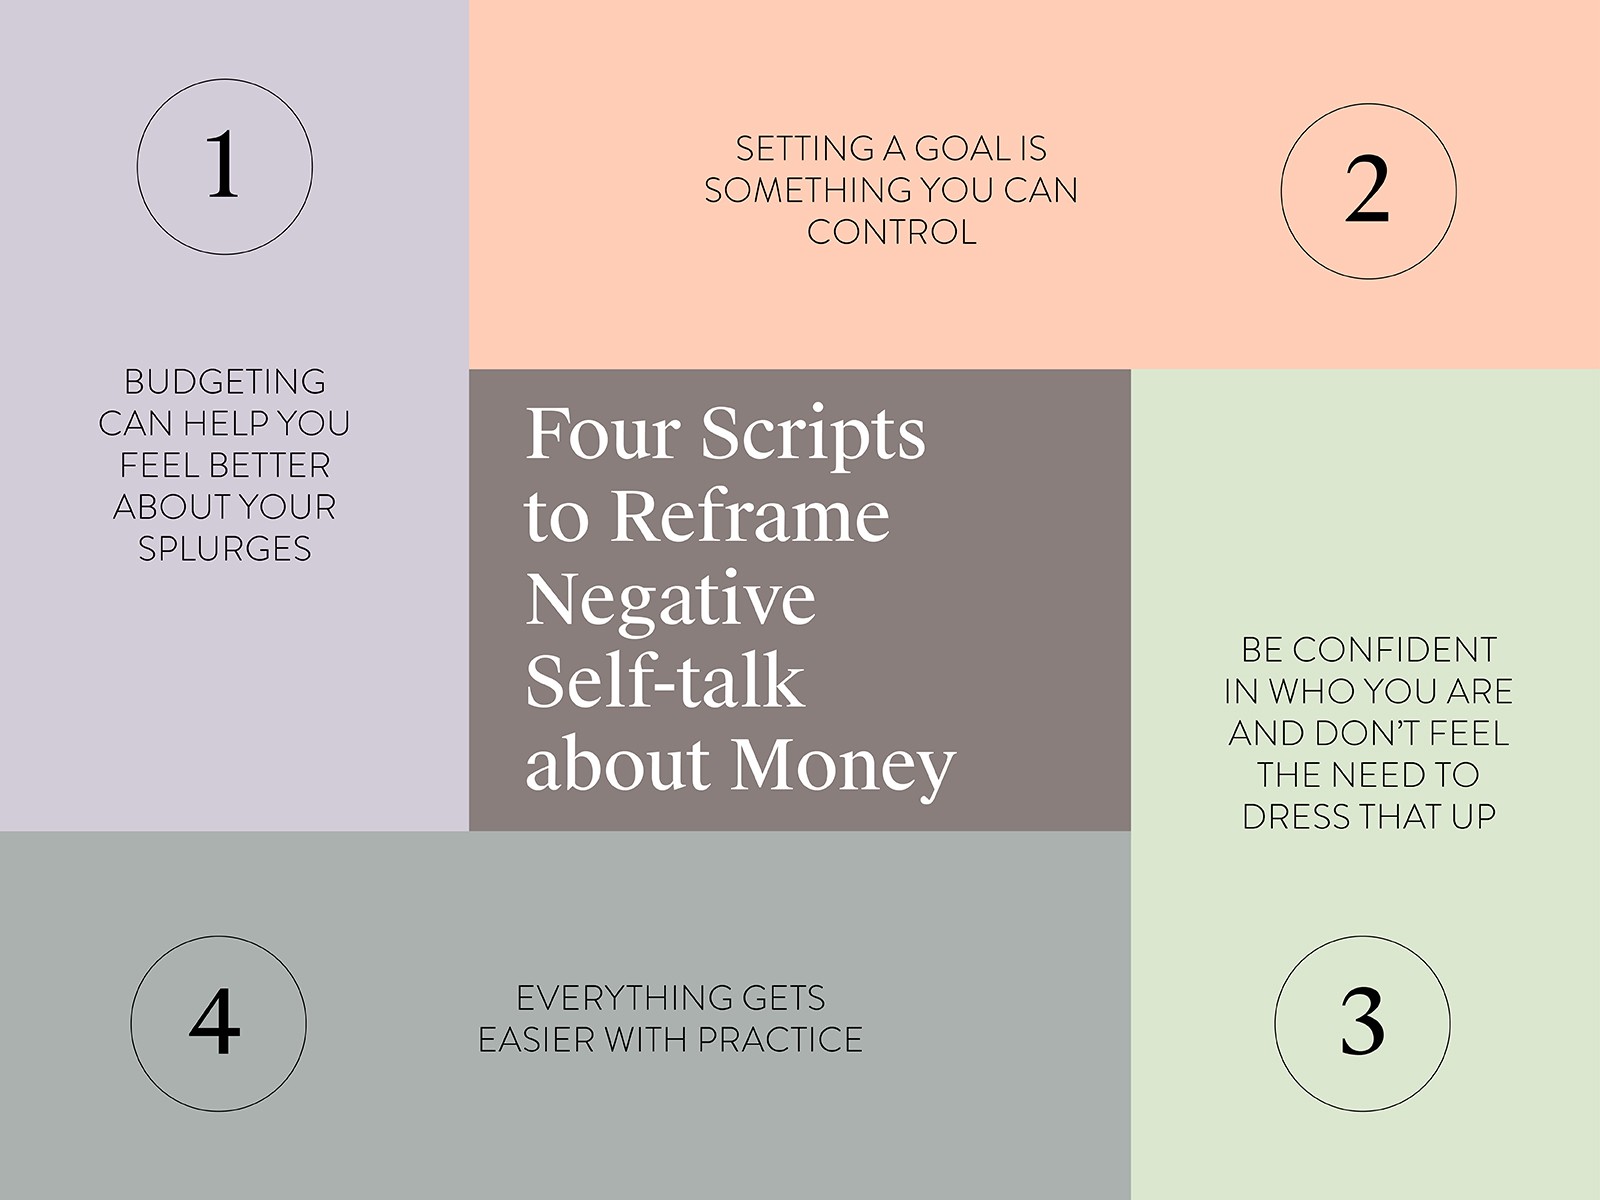 Four-Scripts-to-Reframe-Negative-Self-talk-about-Money_body.jpg